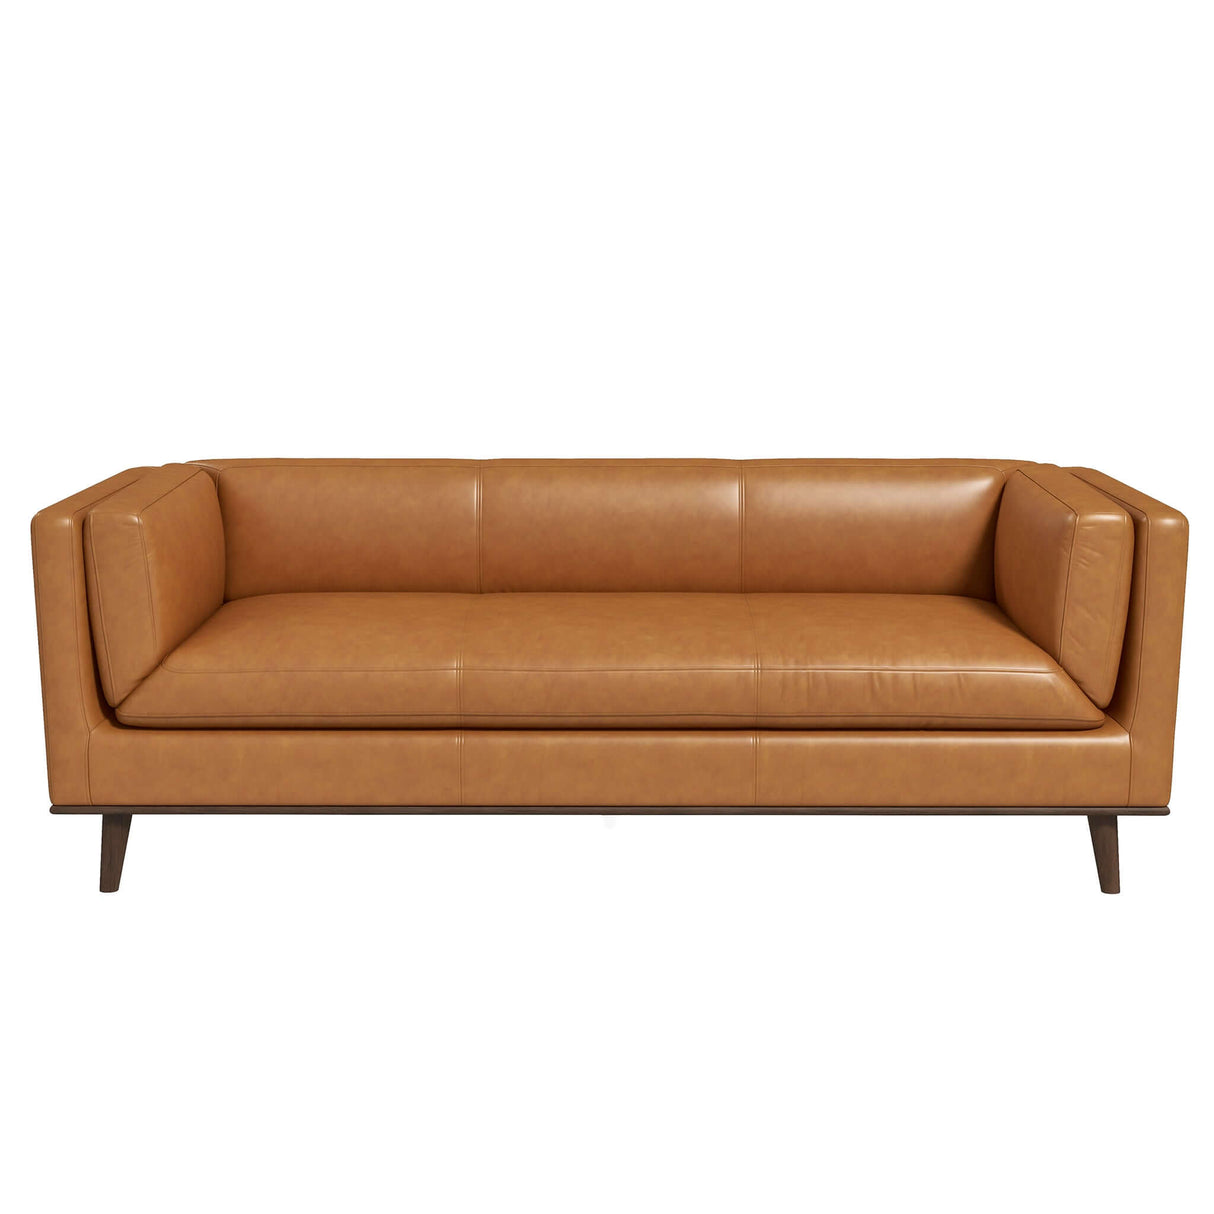 Tan Leather Couch